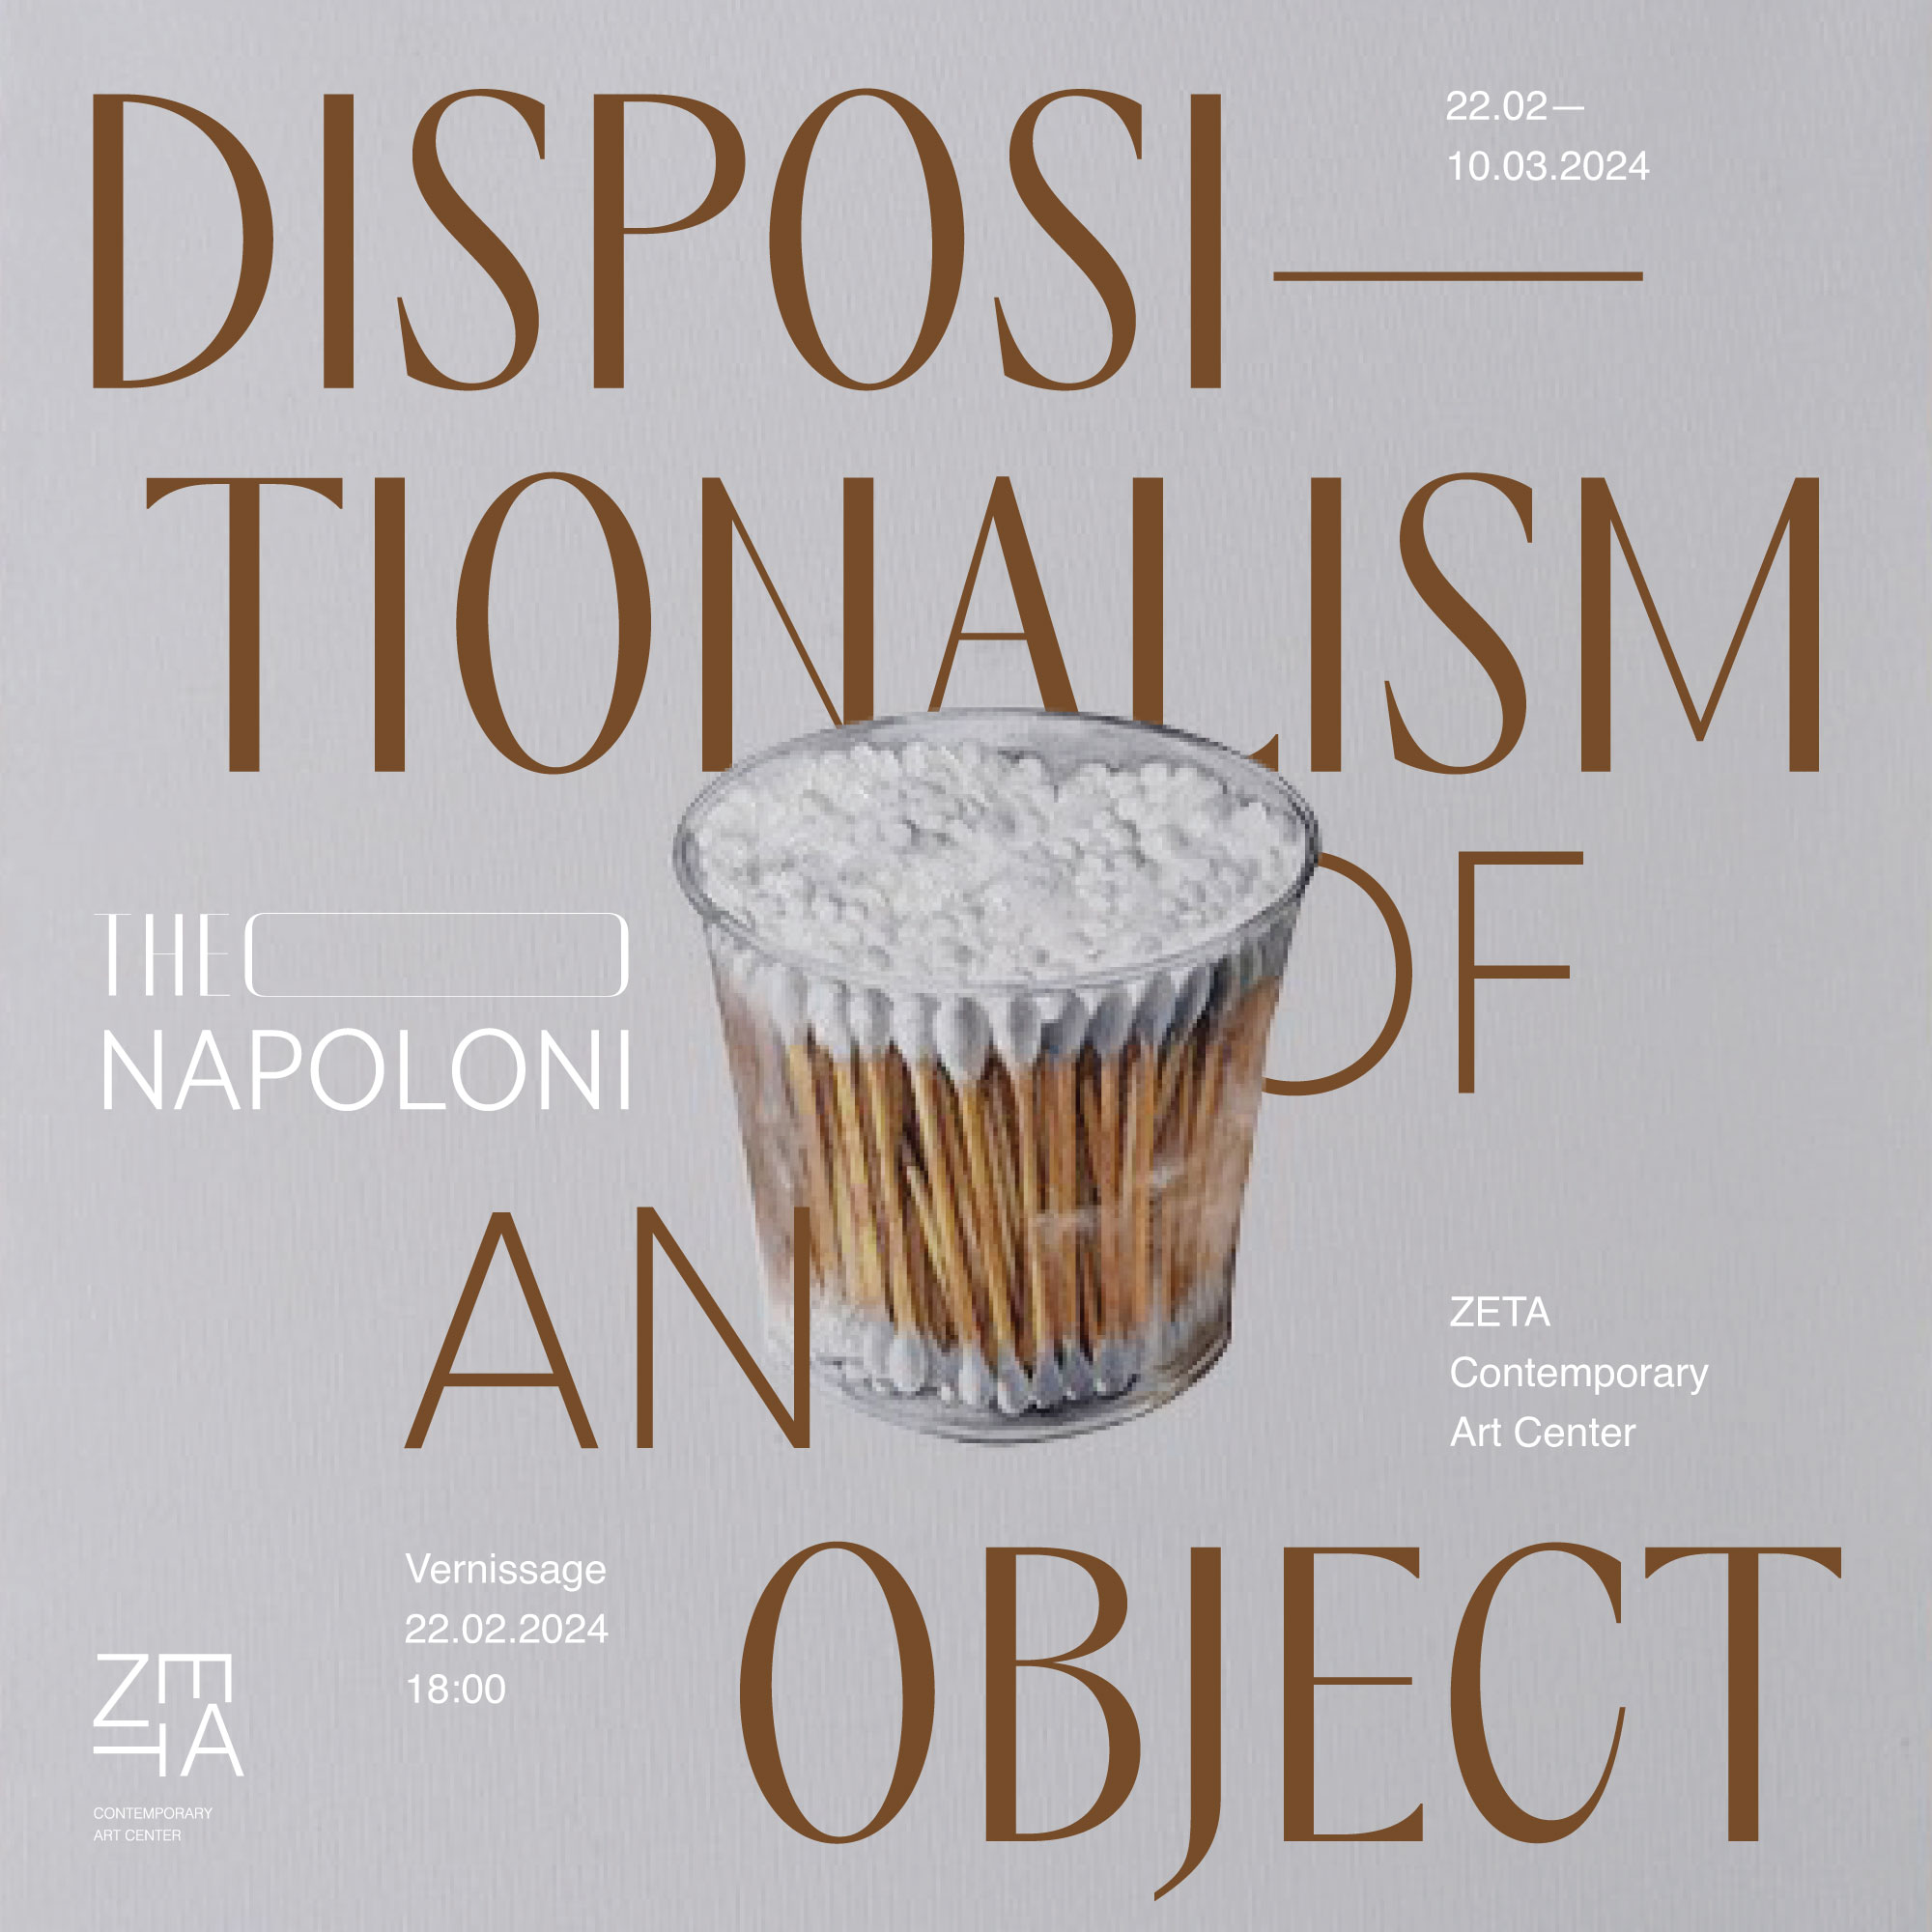 THE DISPOSITIONALISM OF AN OBJECT | Theo Napoloni